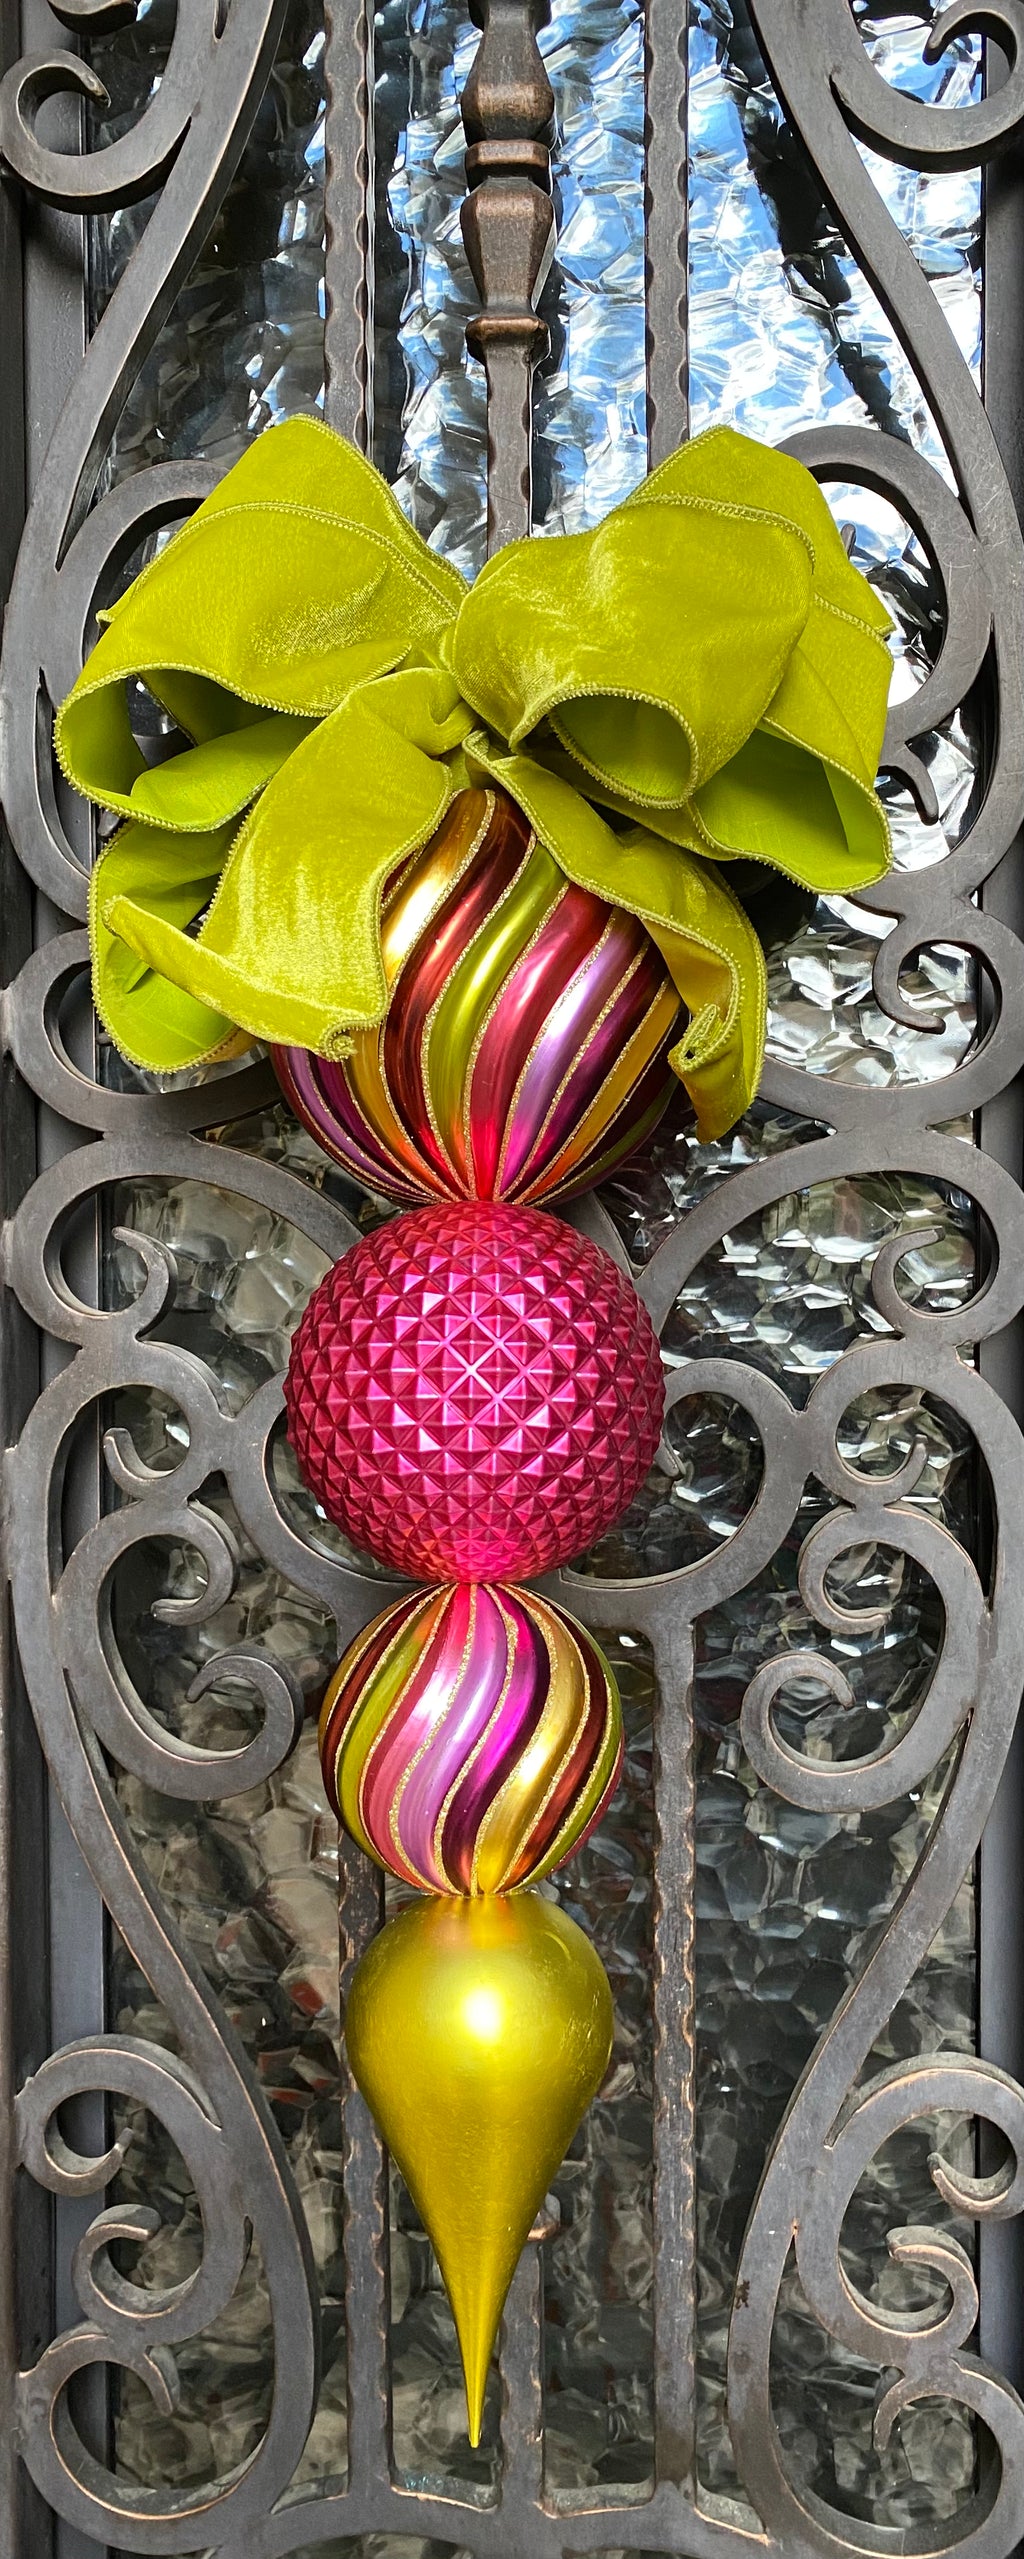 Large Christmas Ornament With Bow product image features a multi colored finial ornament with a bow.  Shatterproof ornament.  Hand tied bow in chartreuse color.  Ornament has three round balls in graduating sizes...largest at the top to a tear drop at the bottom.  Colors are chartreuse, hot pink, purple, lavender and gold.  Ornament measures 21.75"L X 5.5" W .  With Bow, Ornament measures 26"L X 11" W.  Best used indoors or in a covered area.  Shatterproof ornaments can still break so handle with care.